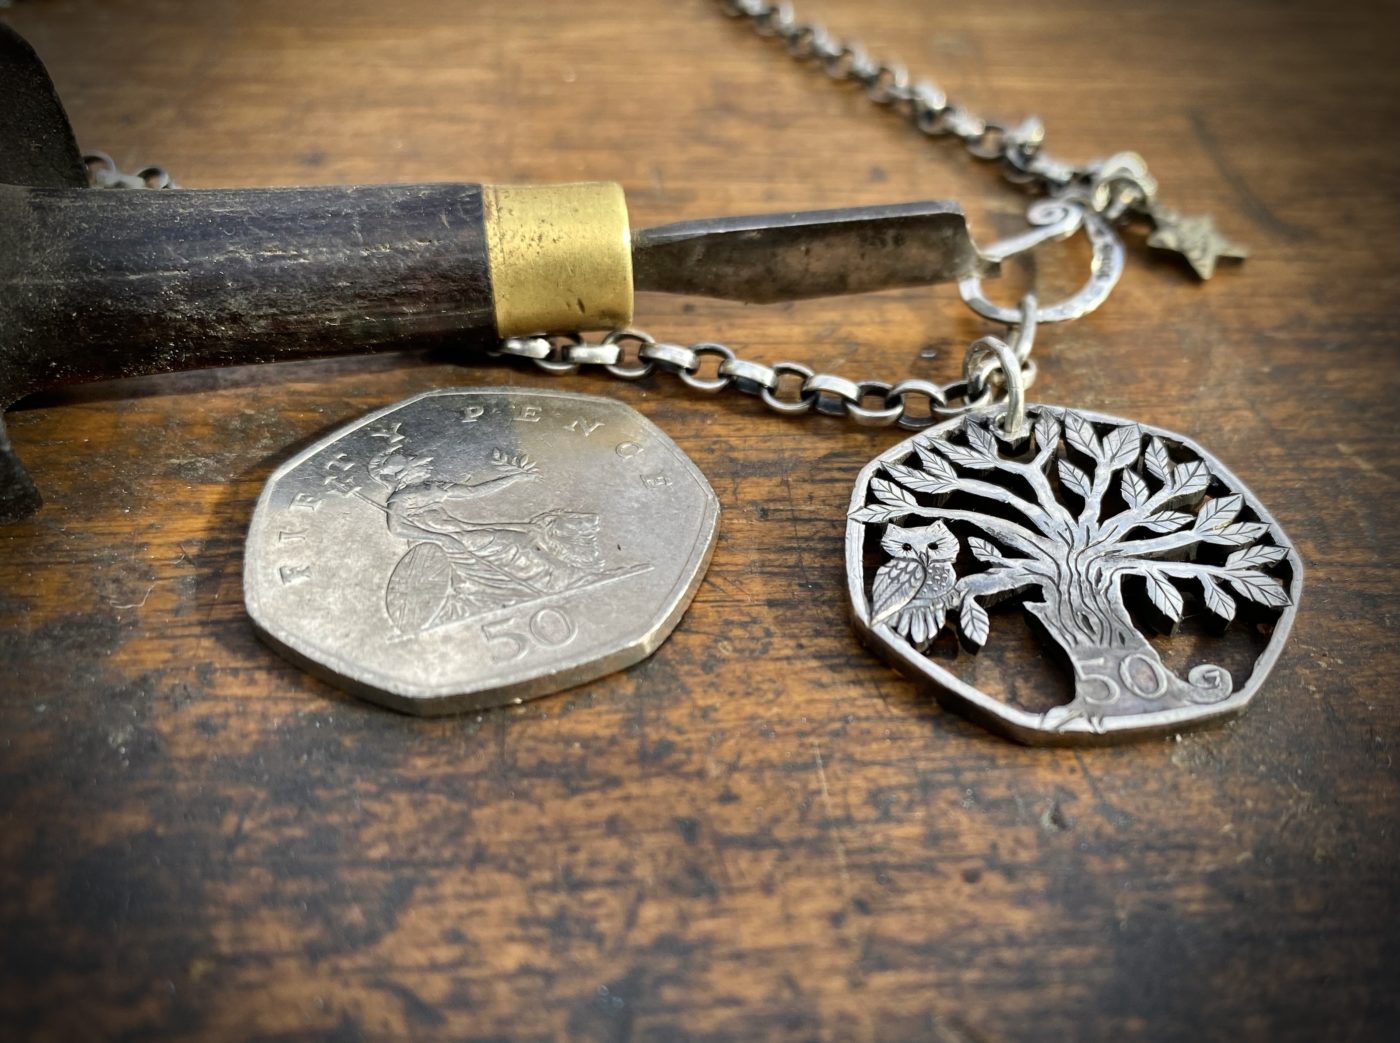 Handmade and upcycled coin owl in the tree pendant necklace